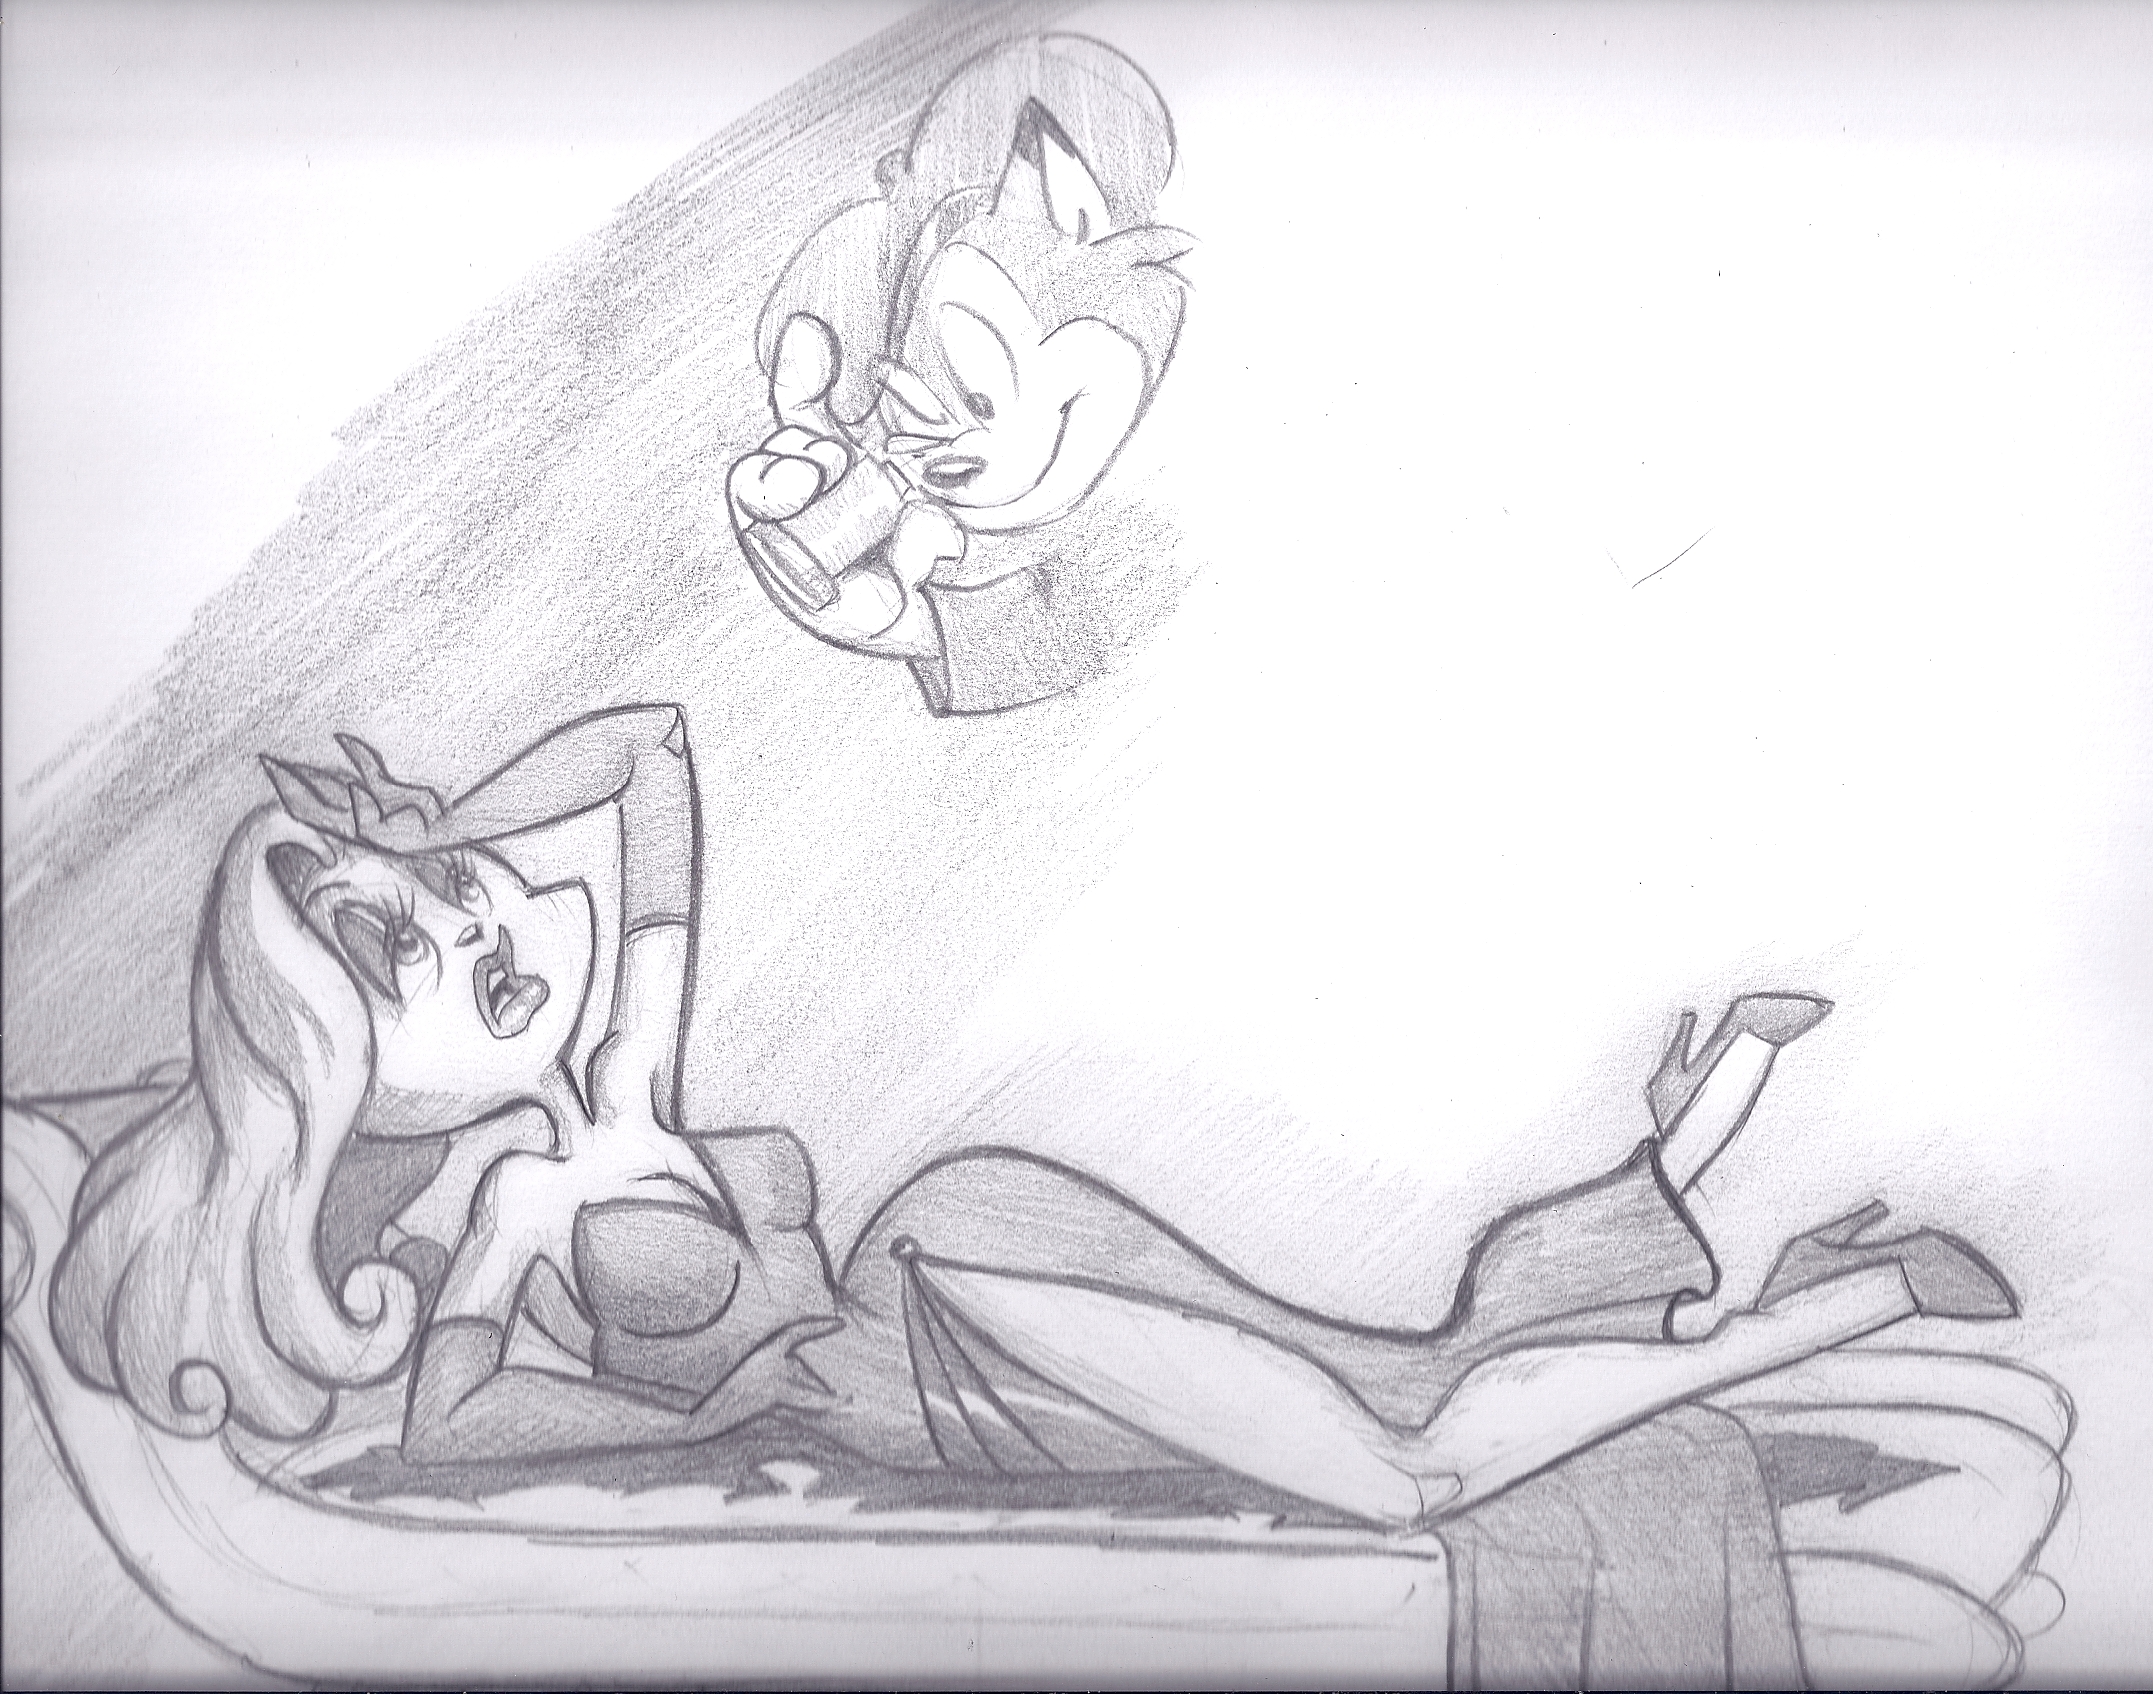 1940’s Hollywood Cartoon Actress & Director-Sketch of the Day